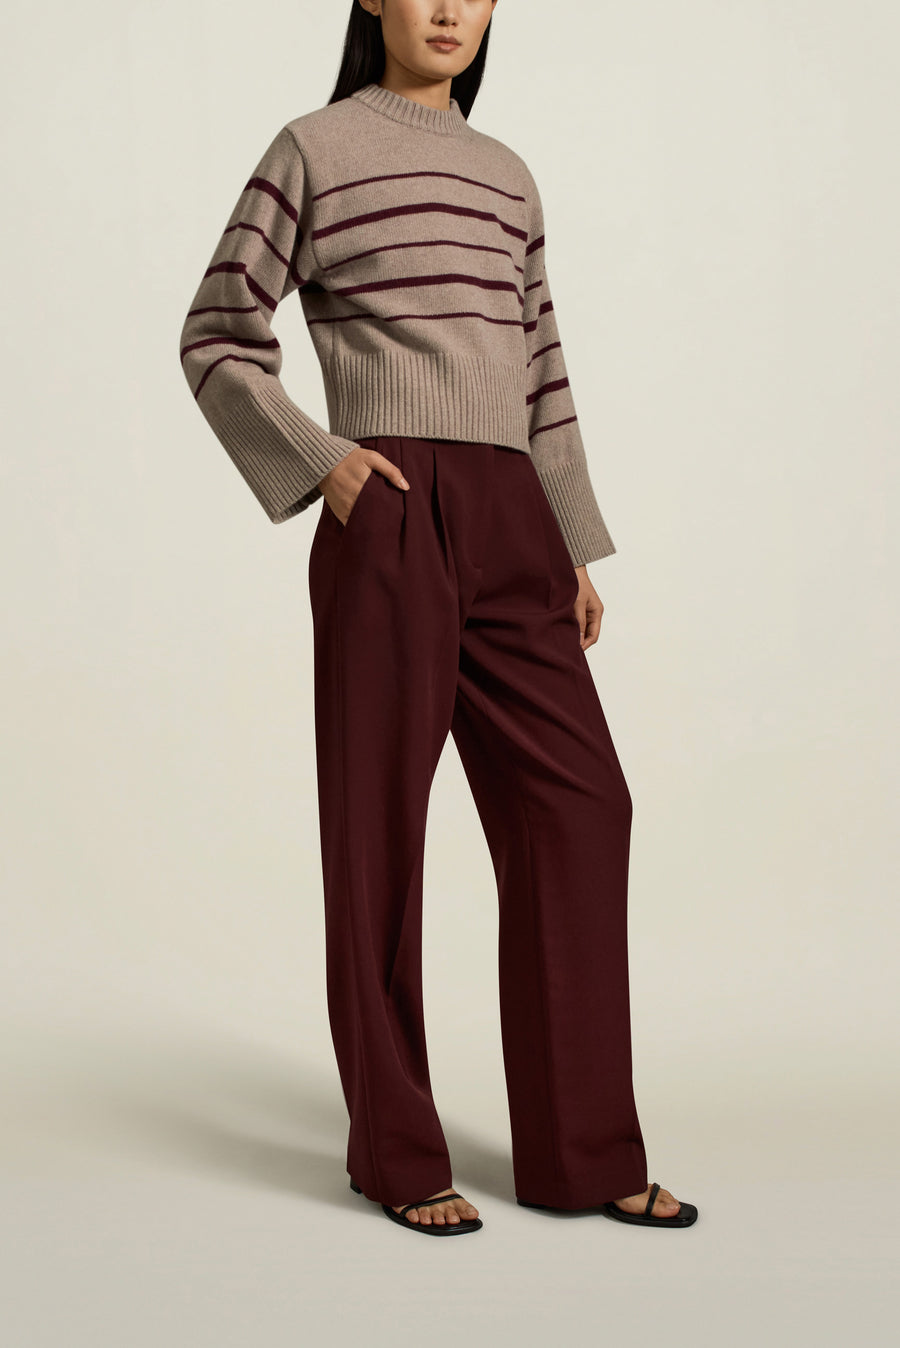 Striped Paloma Sweater in Recycled Cashmere OATMEAL/BURG